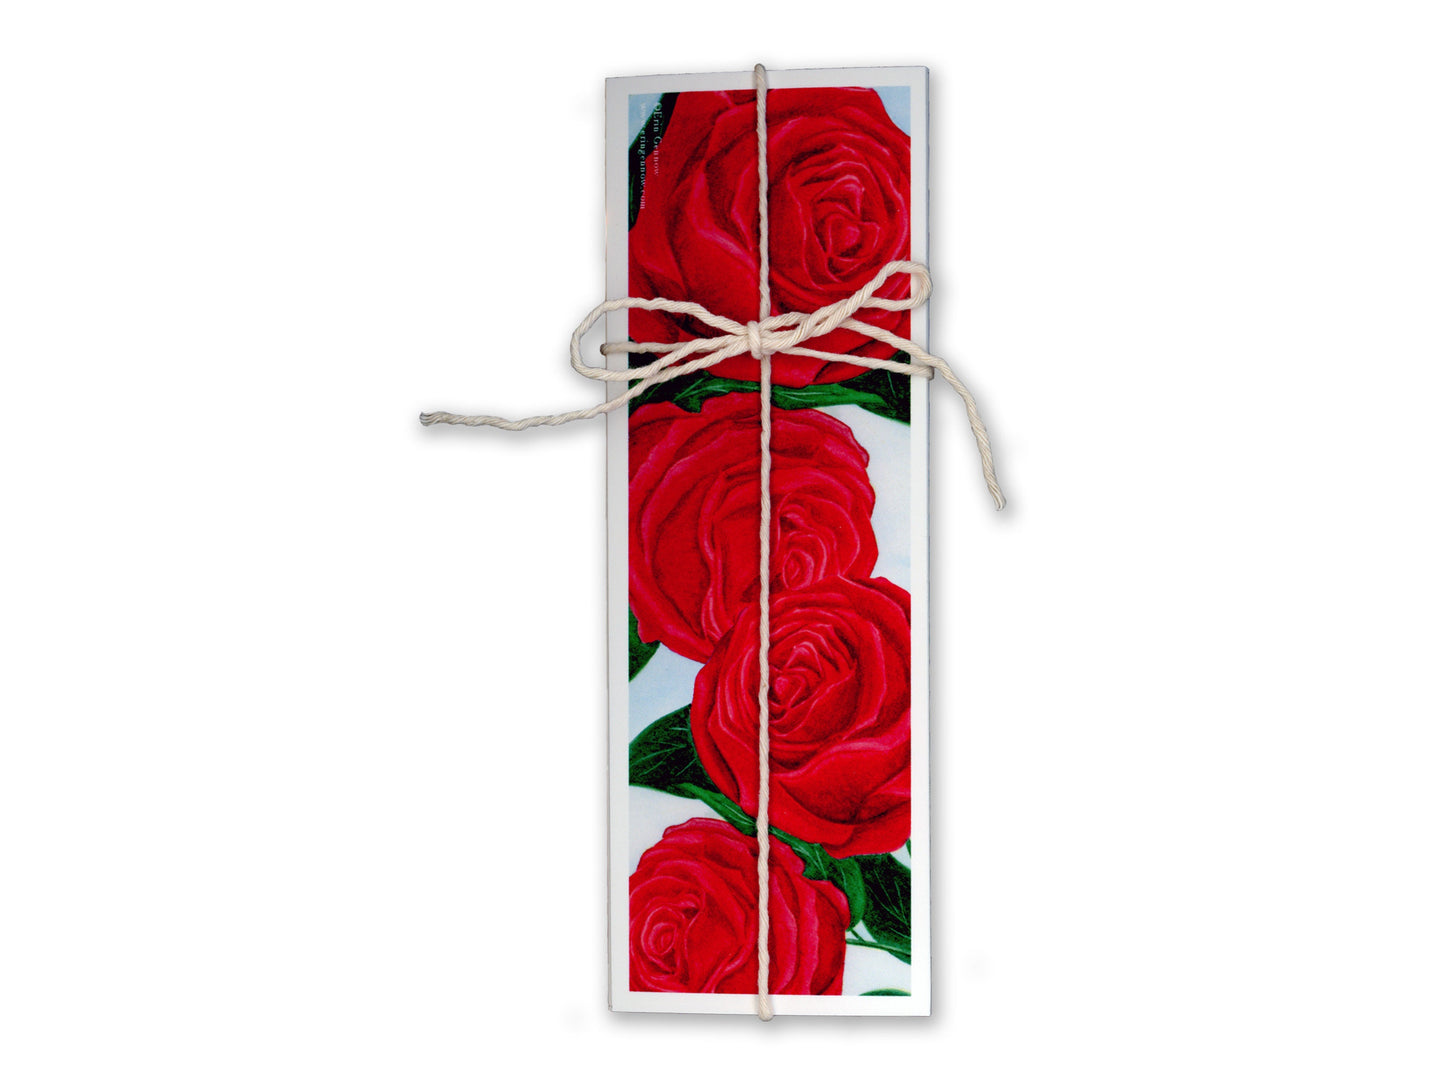 Bookmarks - Set of 4 - The Floral Series - Roses, Tulips, Daisies, Violets, Handmade, 100% cotton rag heavy weight paper